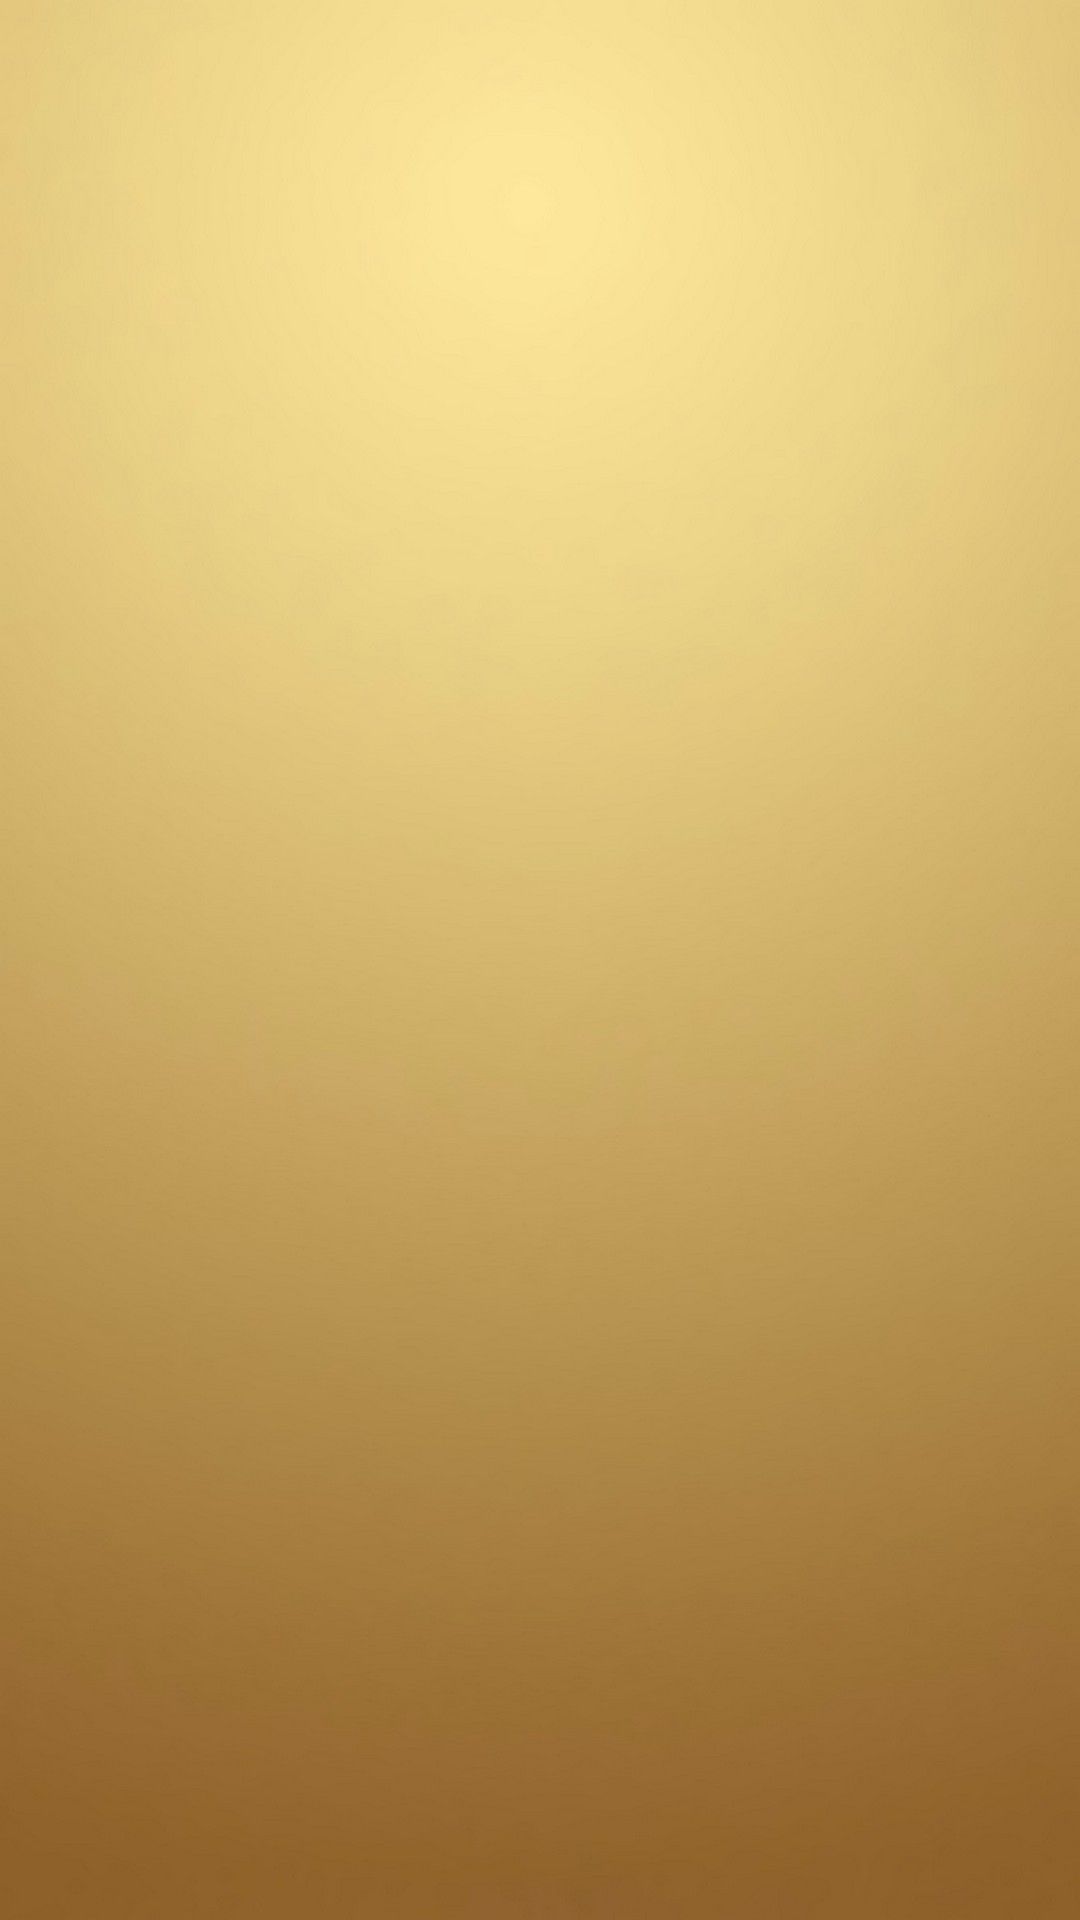 Free download iphone 5 wallpapers hd cool gold beach iphone 5 wallpapers  [640x1136] for your Desktop, Mobile & Tablet | Explore 47+ Cool Gold  Wallpapers | Gold Color Wallpaper, Gold Wallpapers, Gold Backgrounds